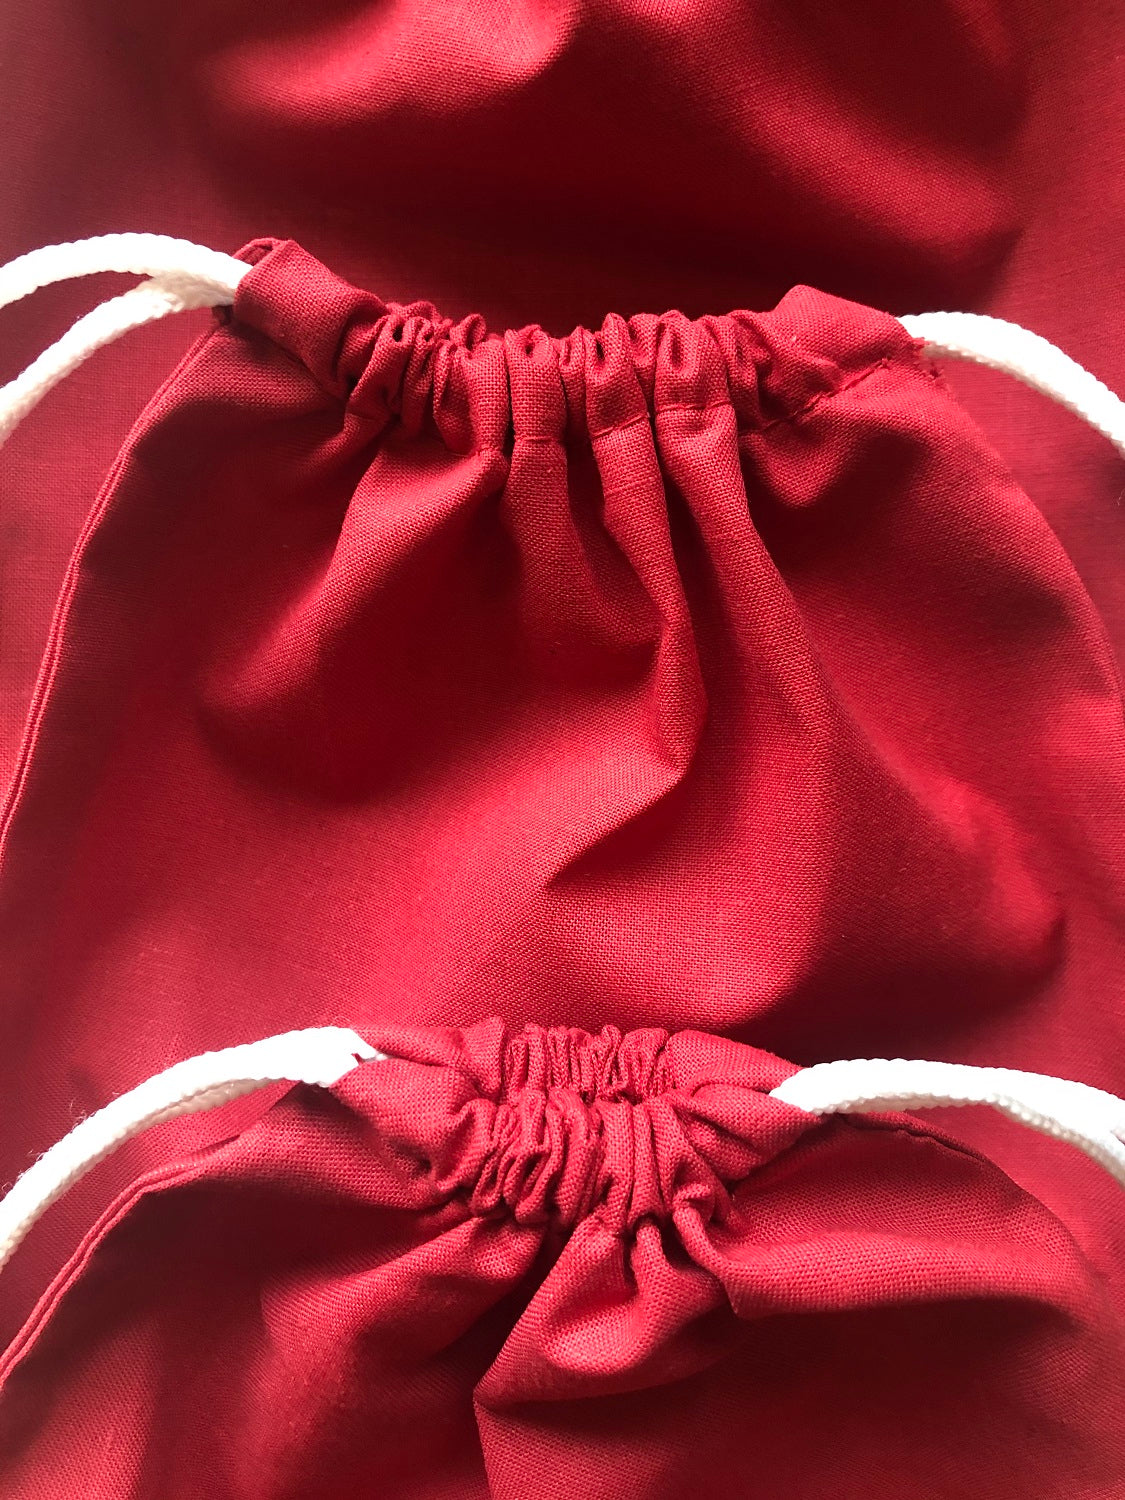 4x6 Inches Reusable Eco-Friendly Cotton Double Drawstring Bags Red Color